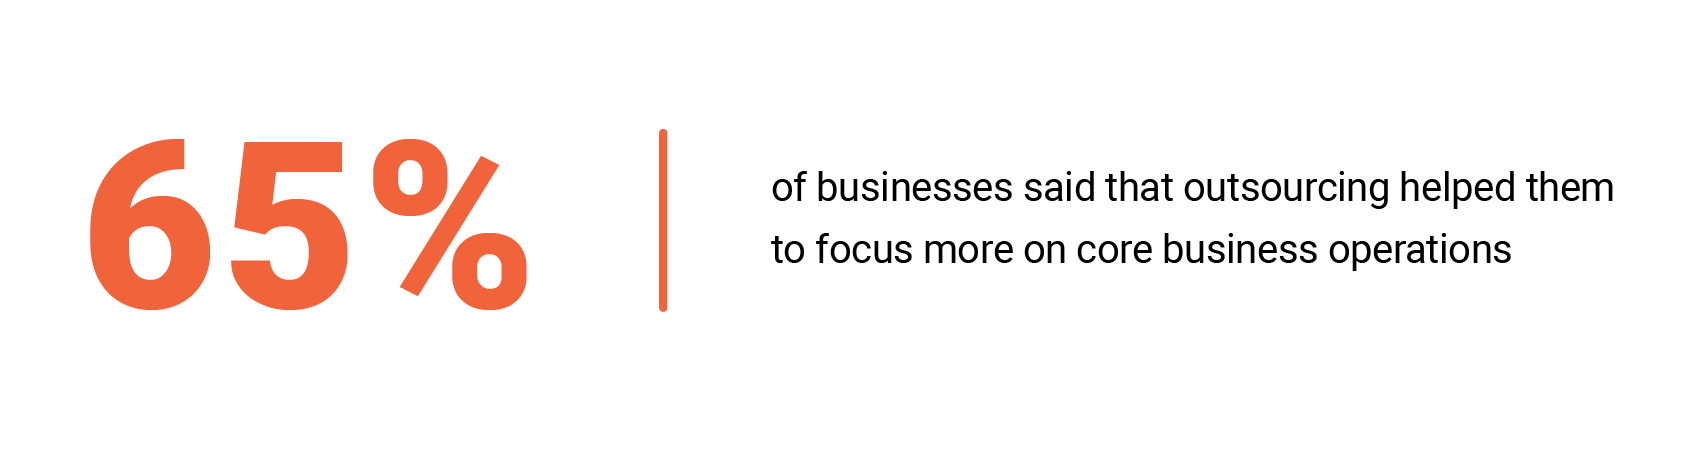 65% of businesses said that outsourcing helped them to focus more on core business operations